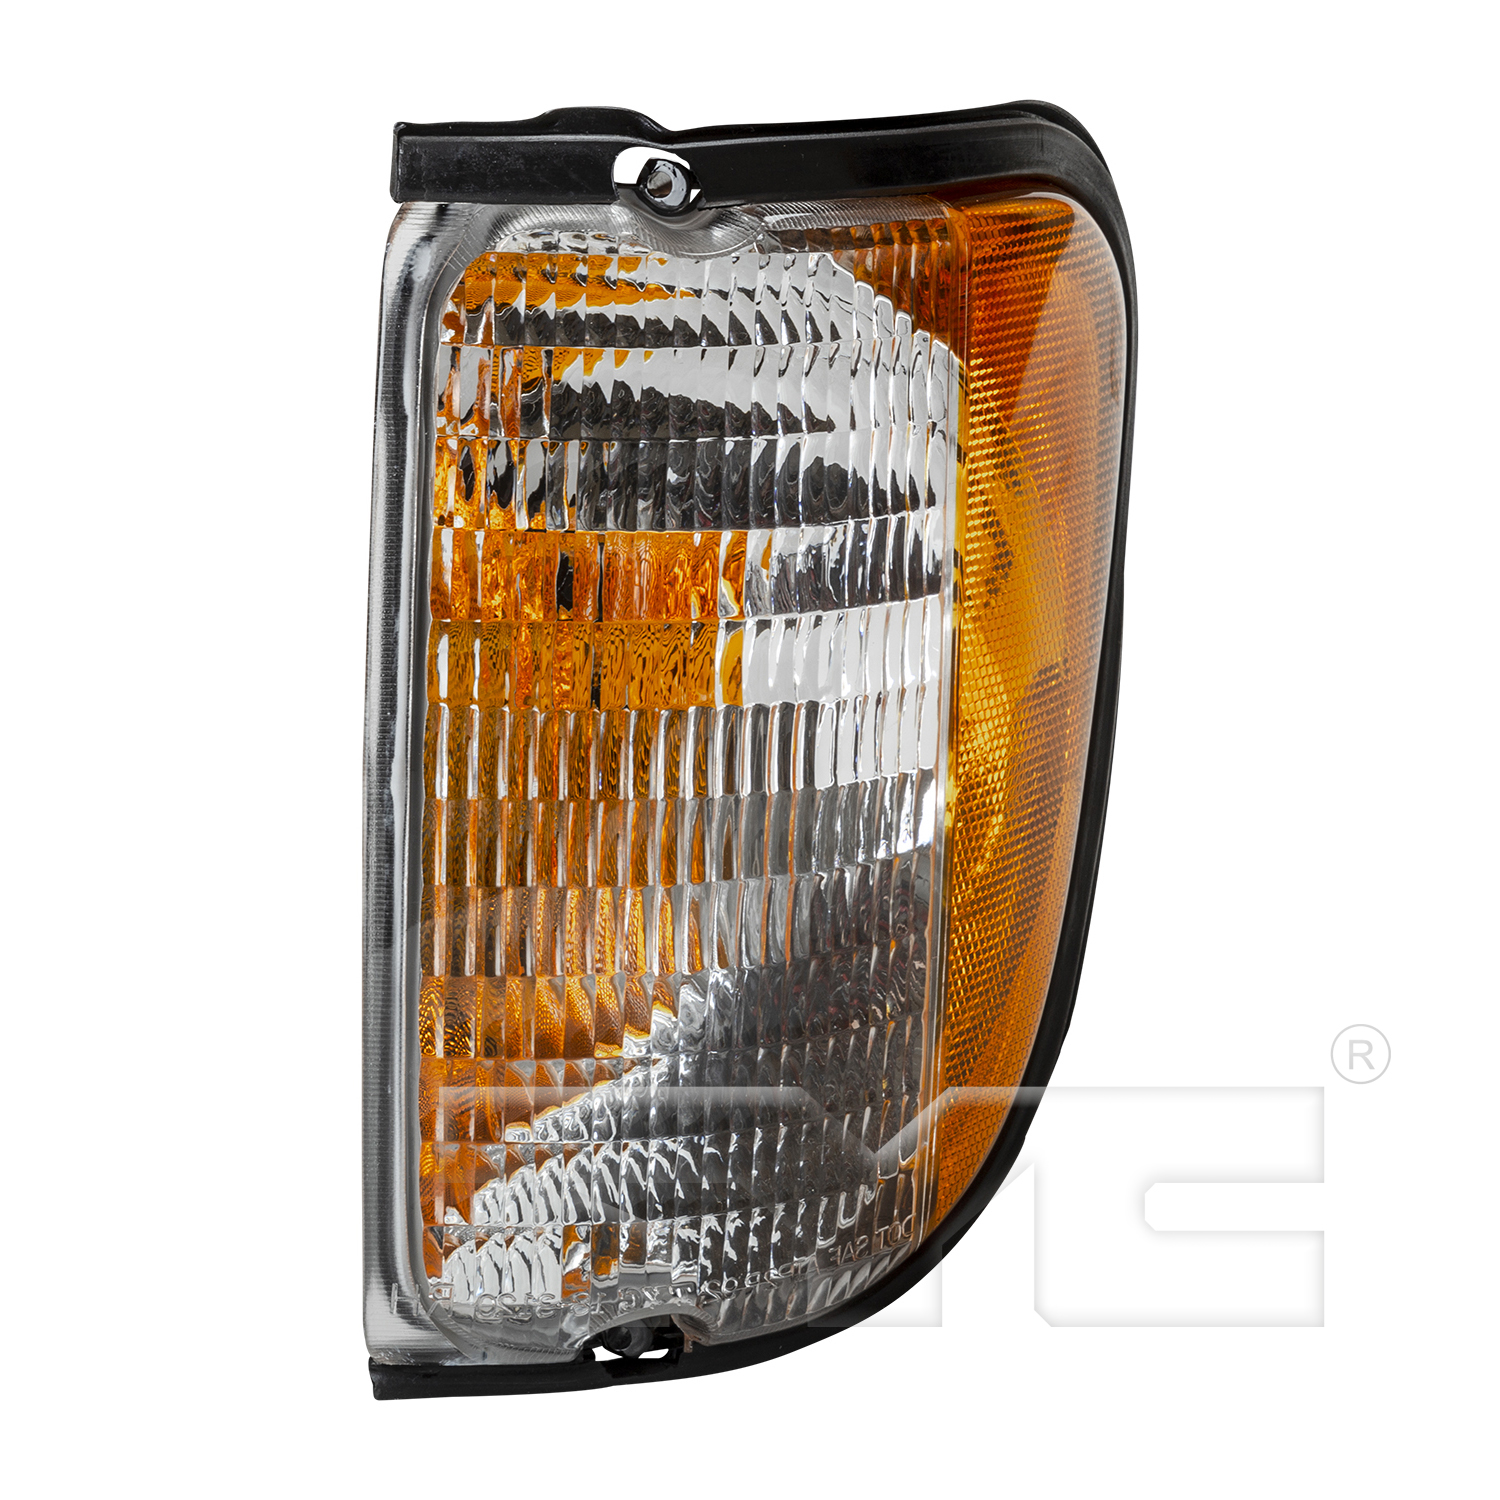 Aftermarket LAMPS for FORD - E-350 ECONOLINE CLUB WAGON, E-350 ECONOLINE CLUB WAGON,92-02,LT Parklamp assy